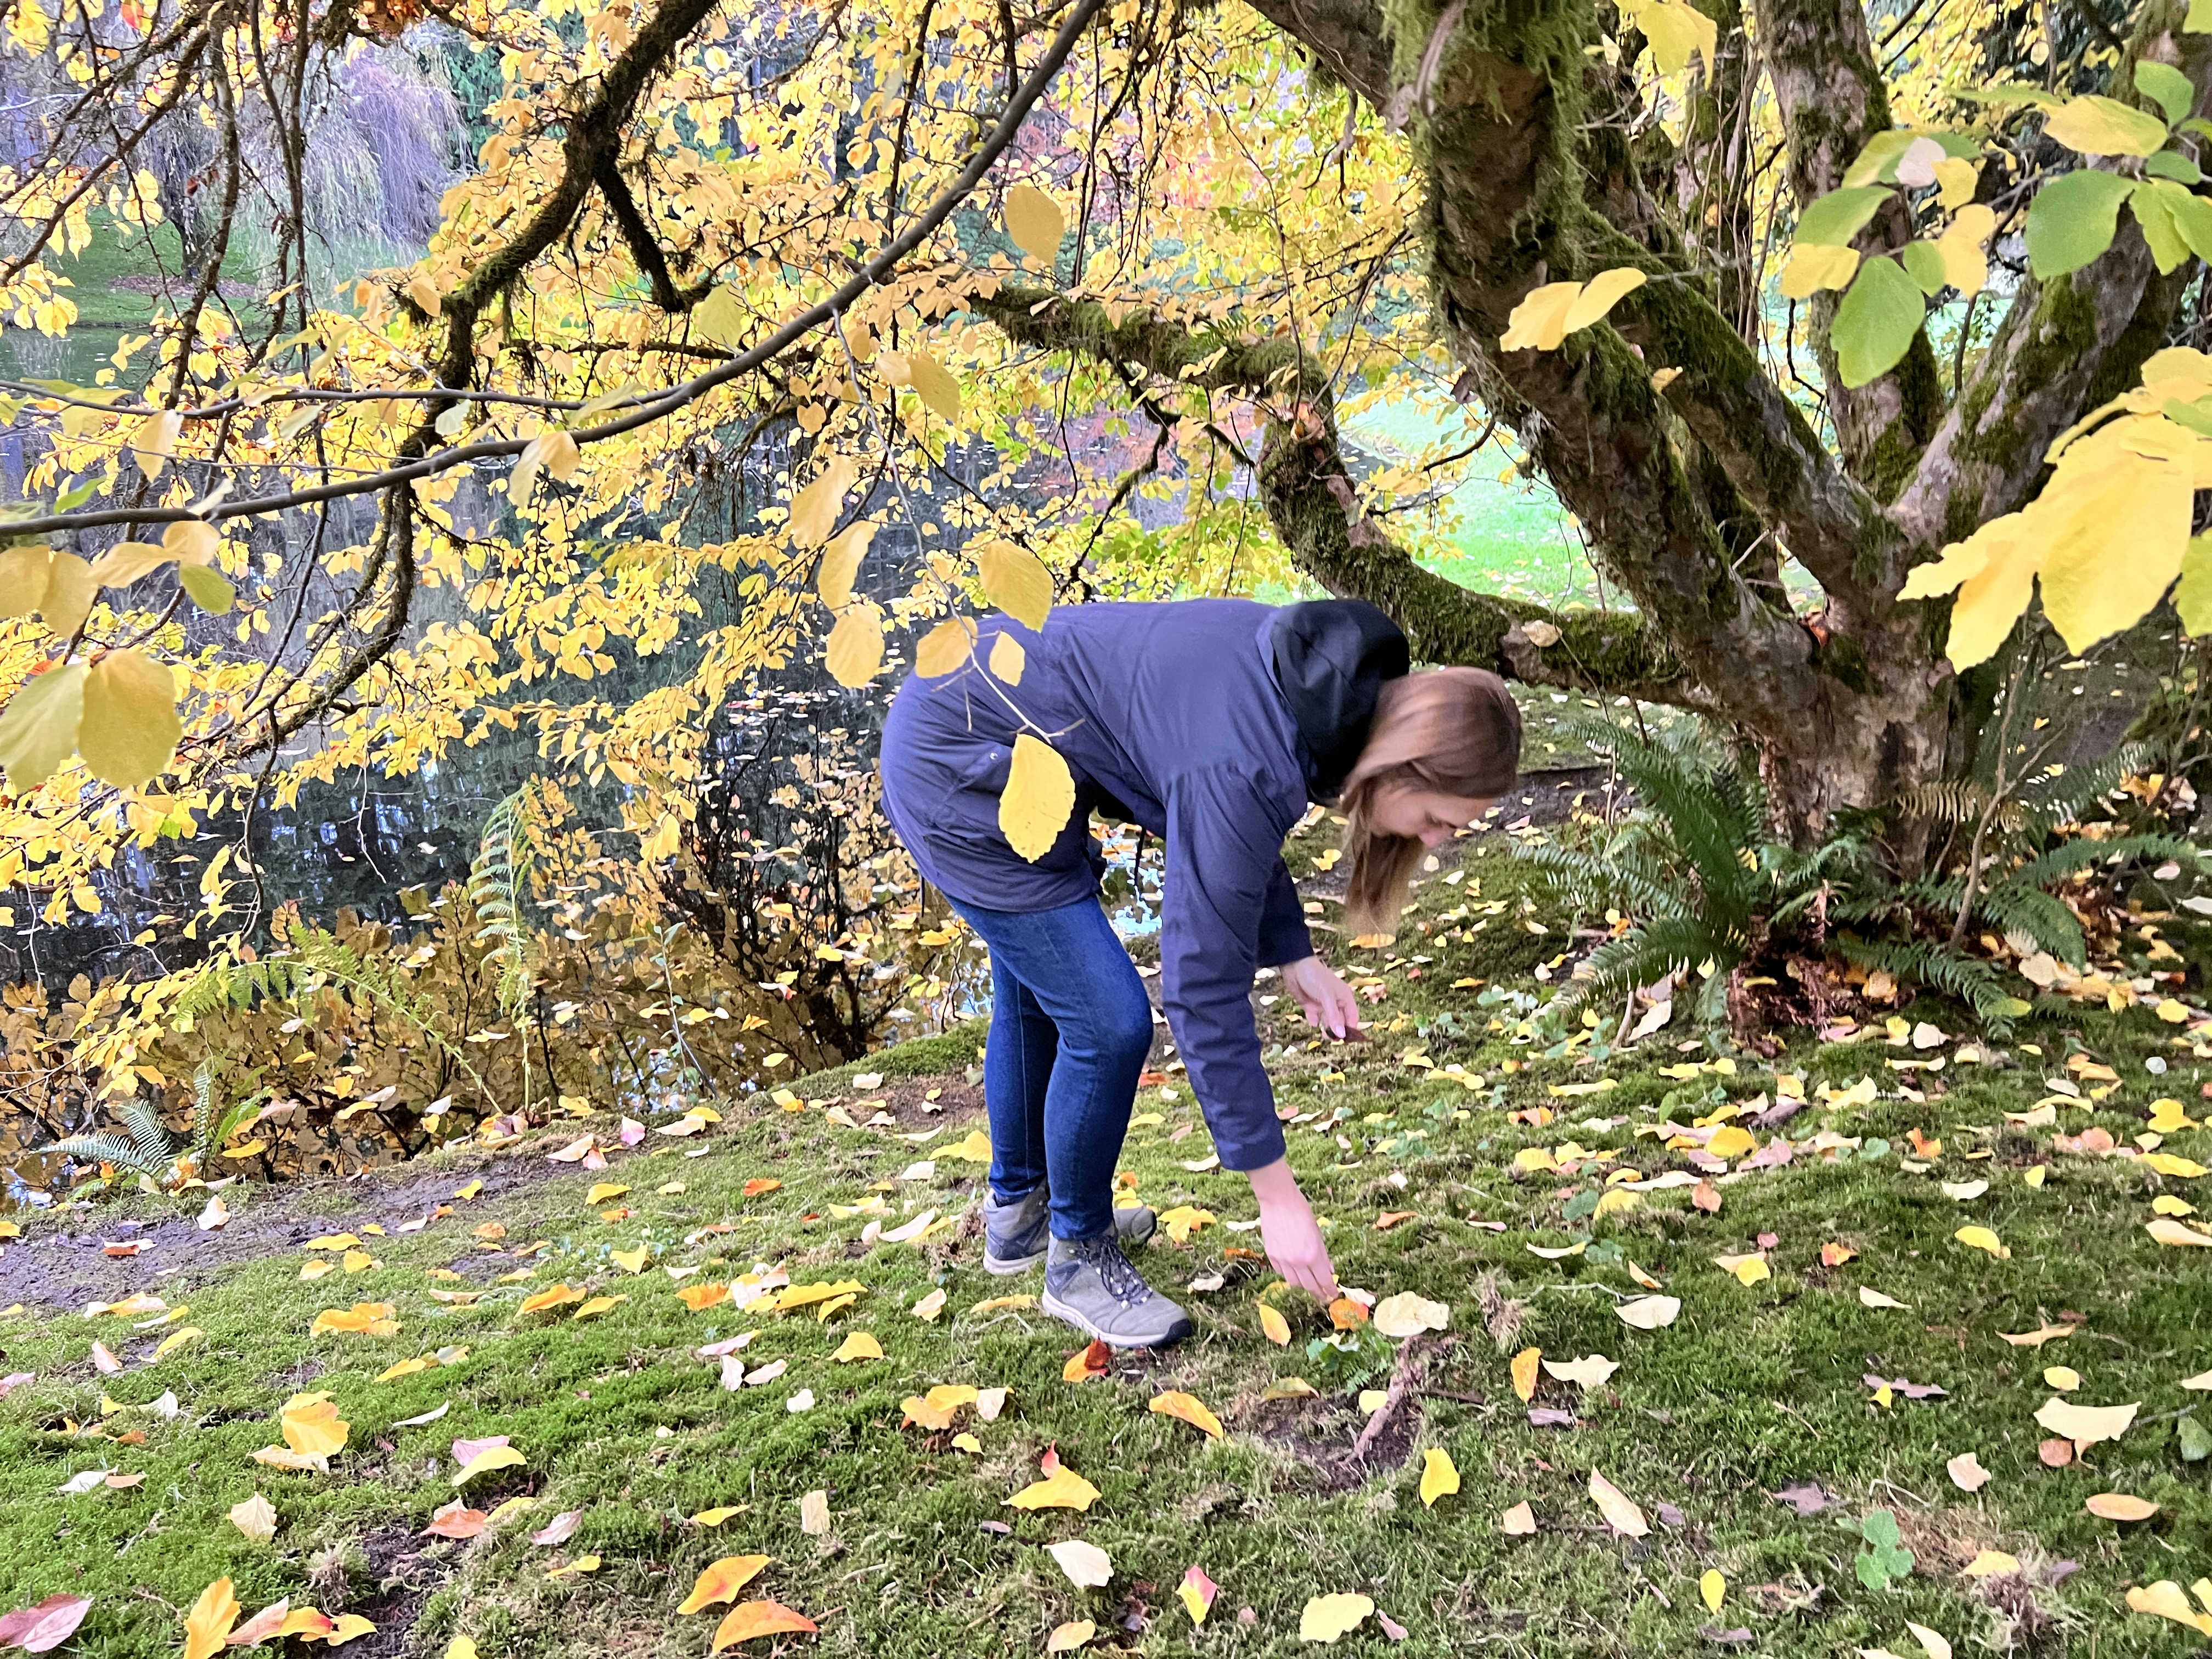 Collecting leaves under the Persian ironwood